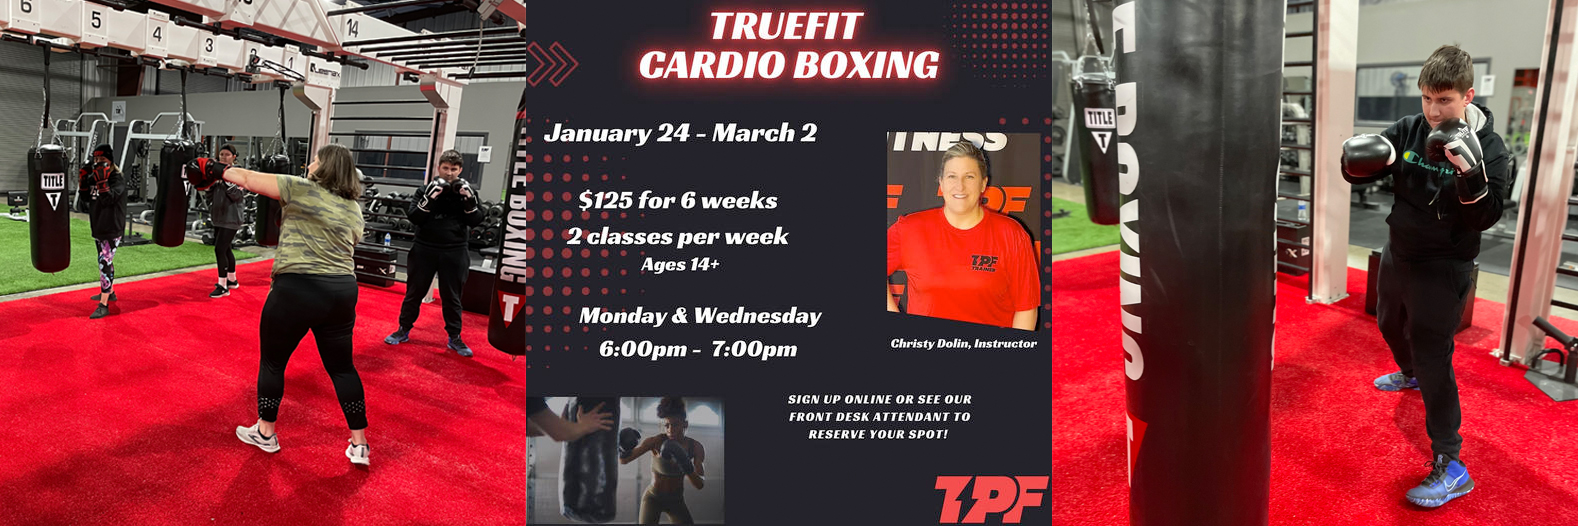 Monday and Wednesday 6PM Classes for Truefit Cardio Boxing, taught by Christy Dolin